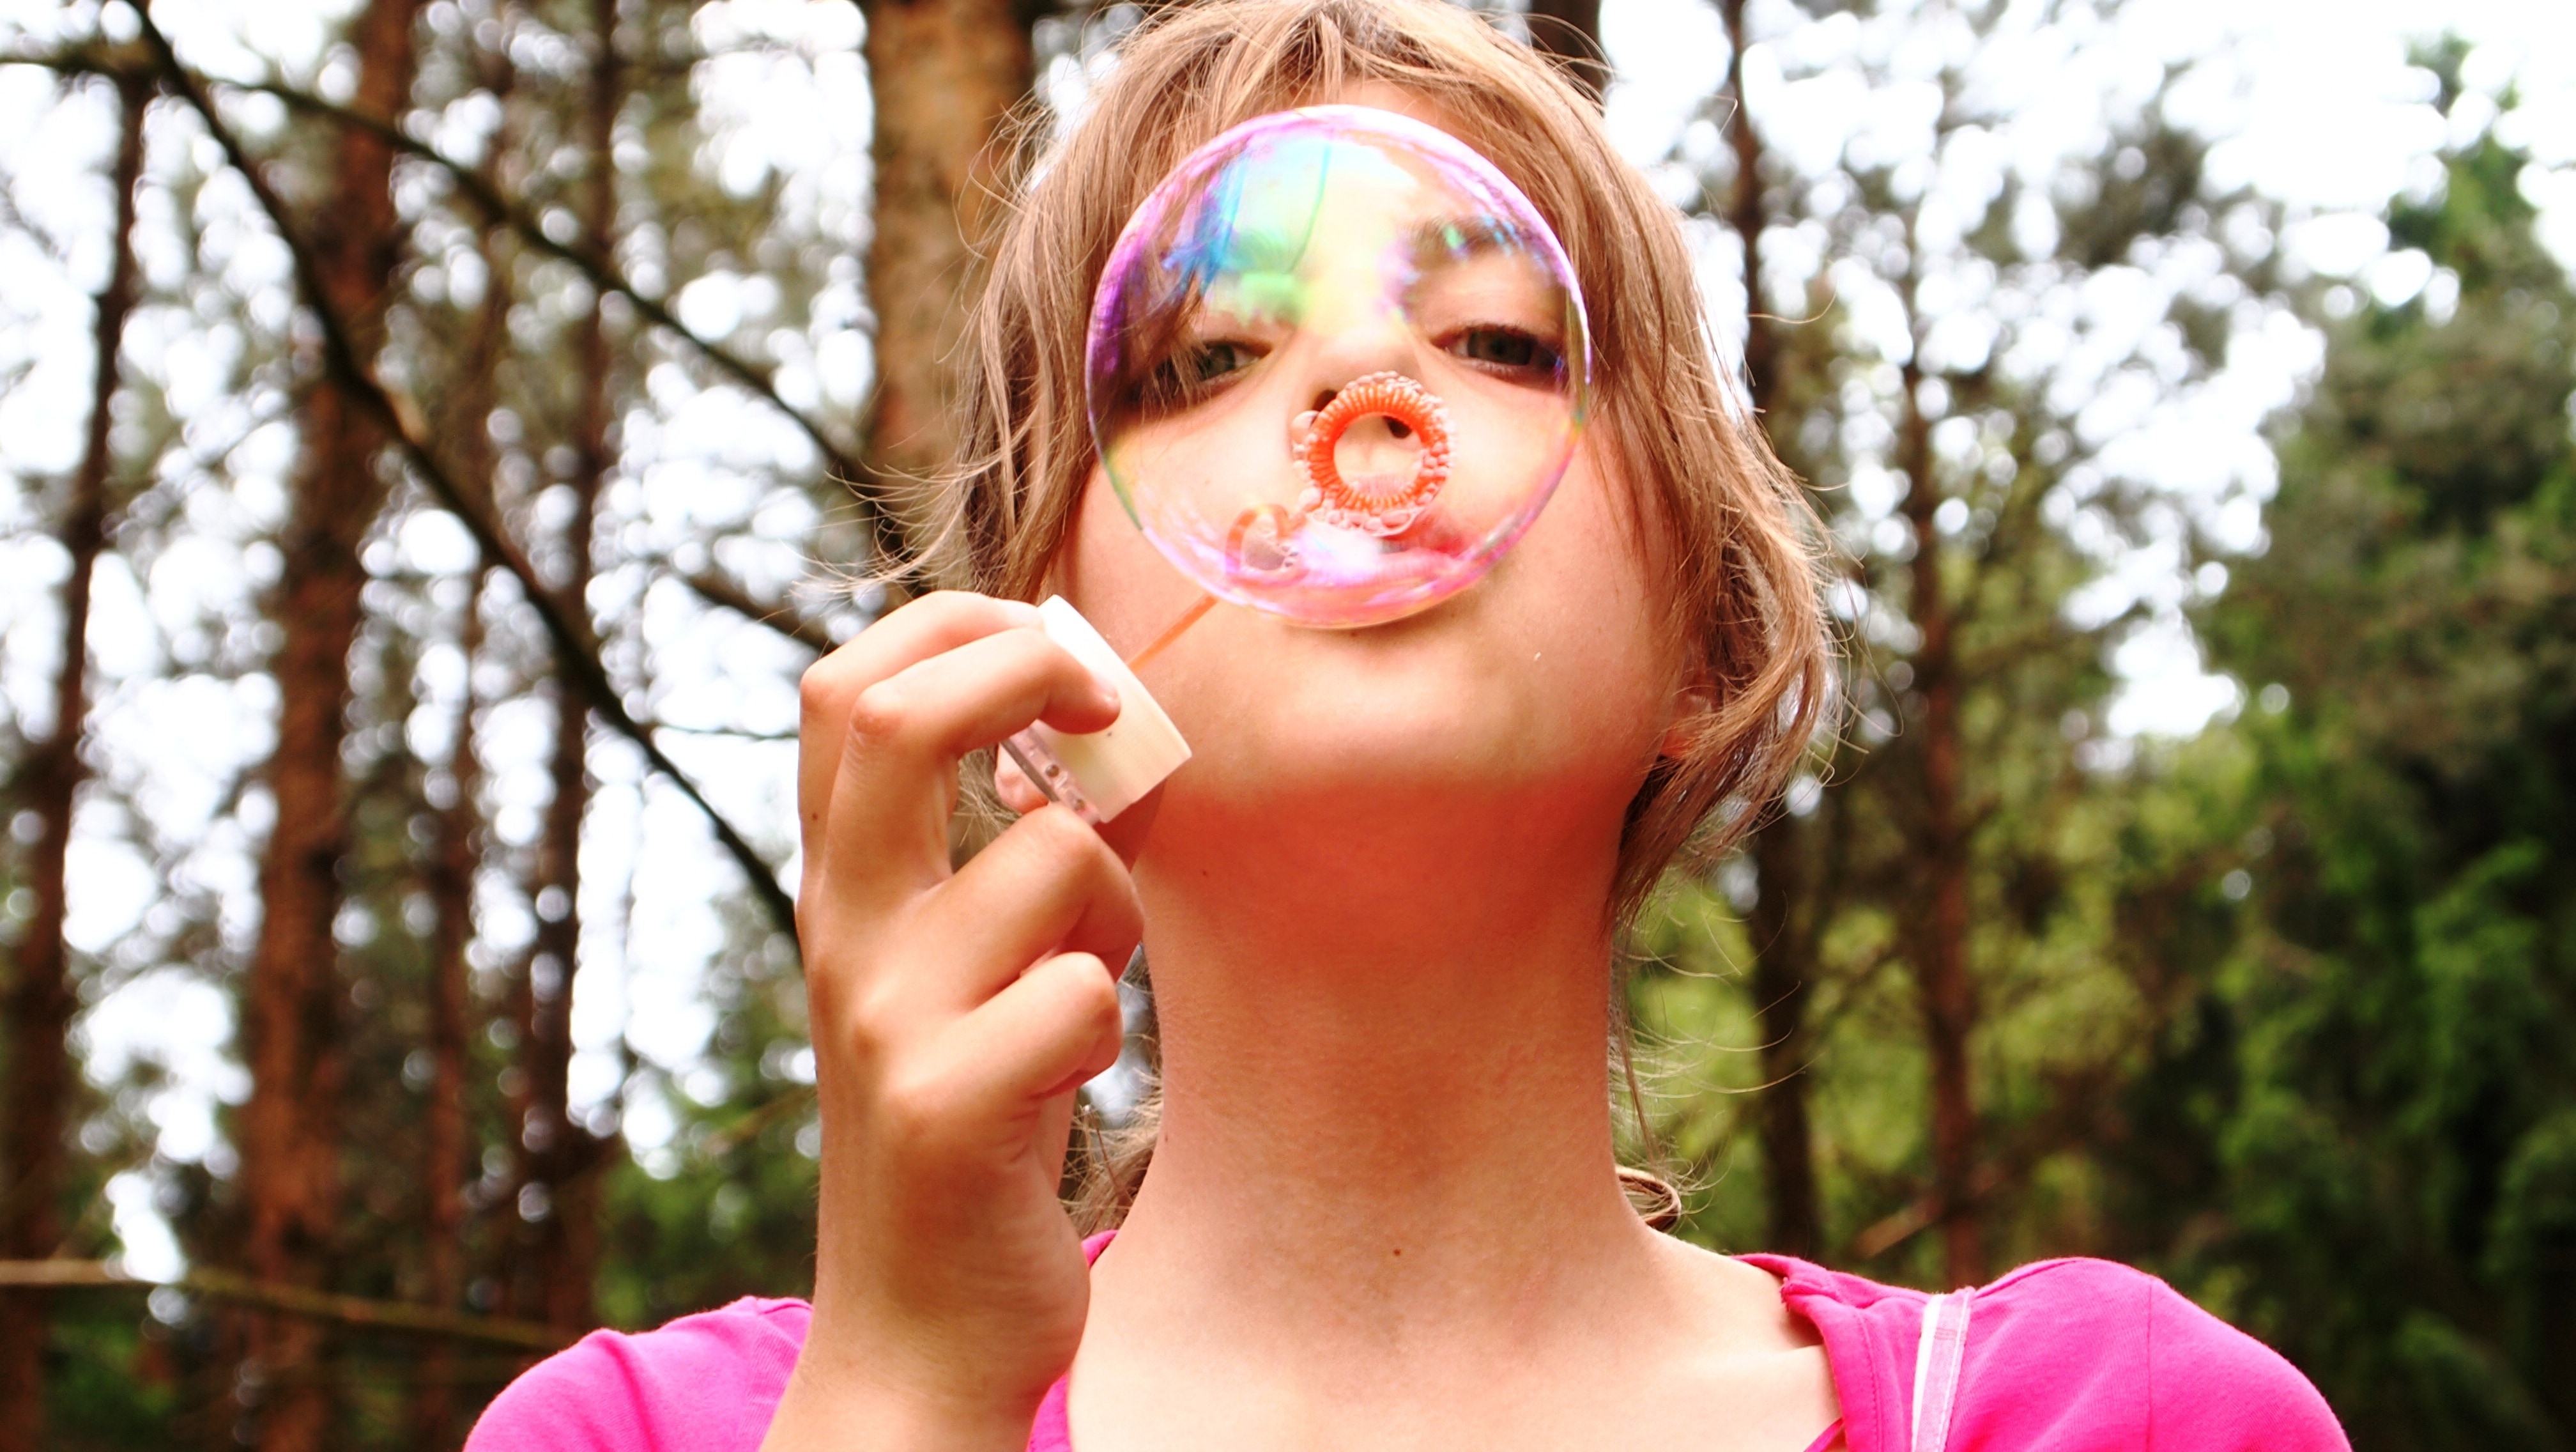 Blow Bubbles, Happy, Girl, Face, Forest, headshot, one person